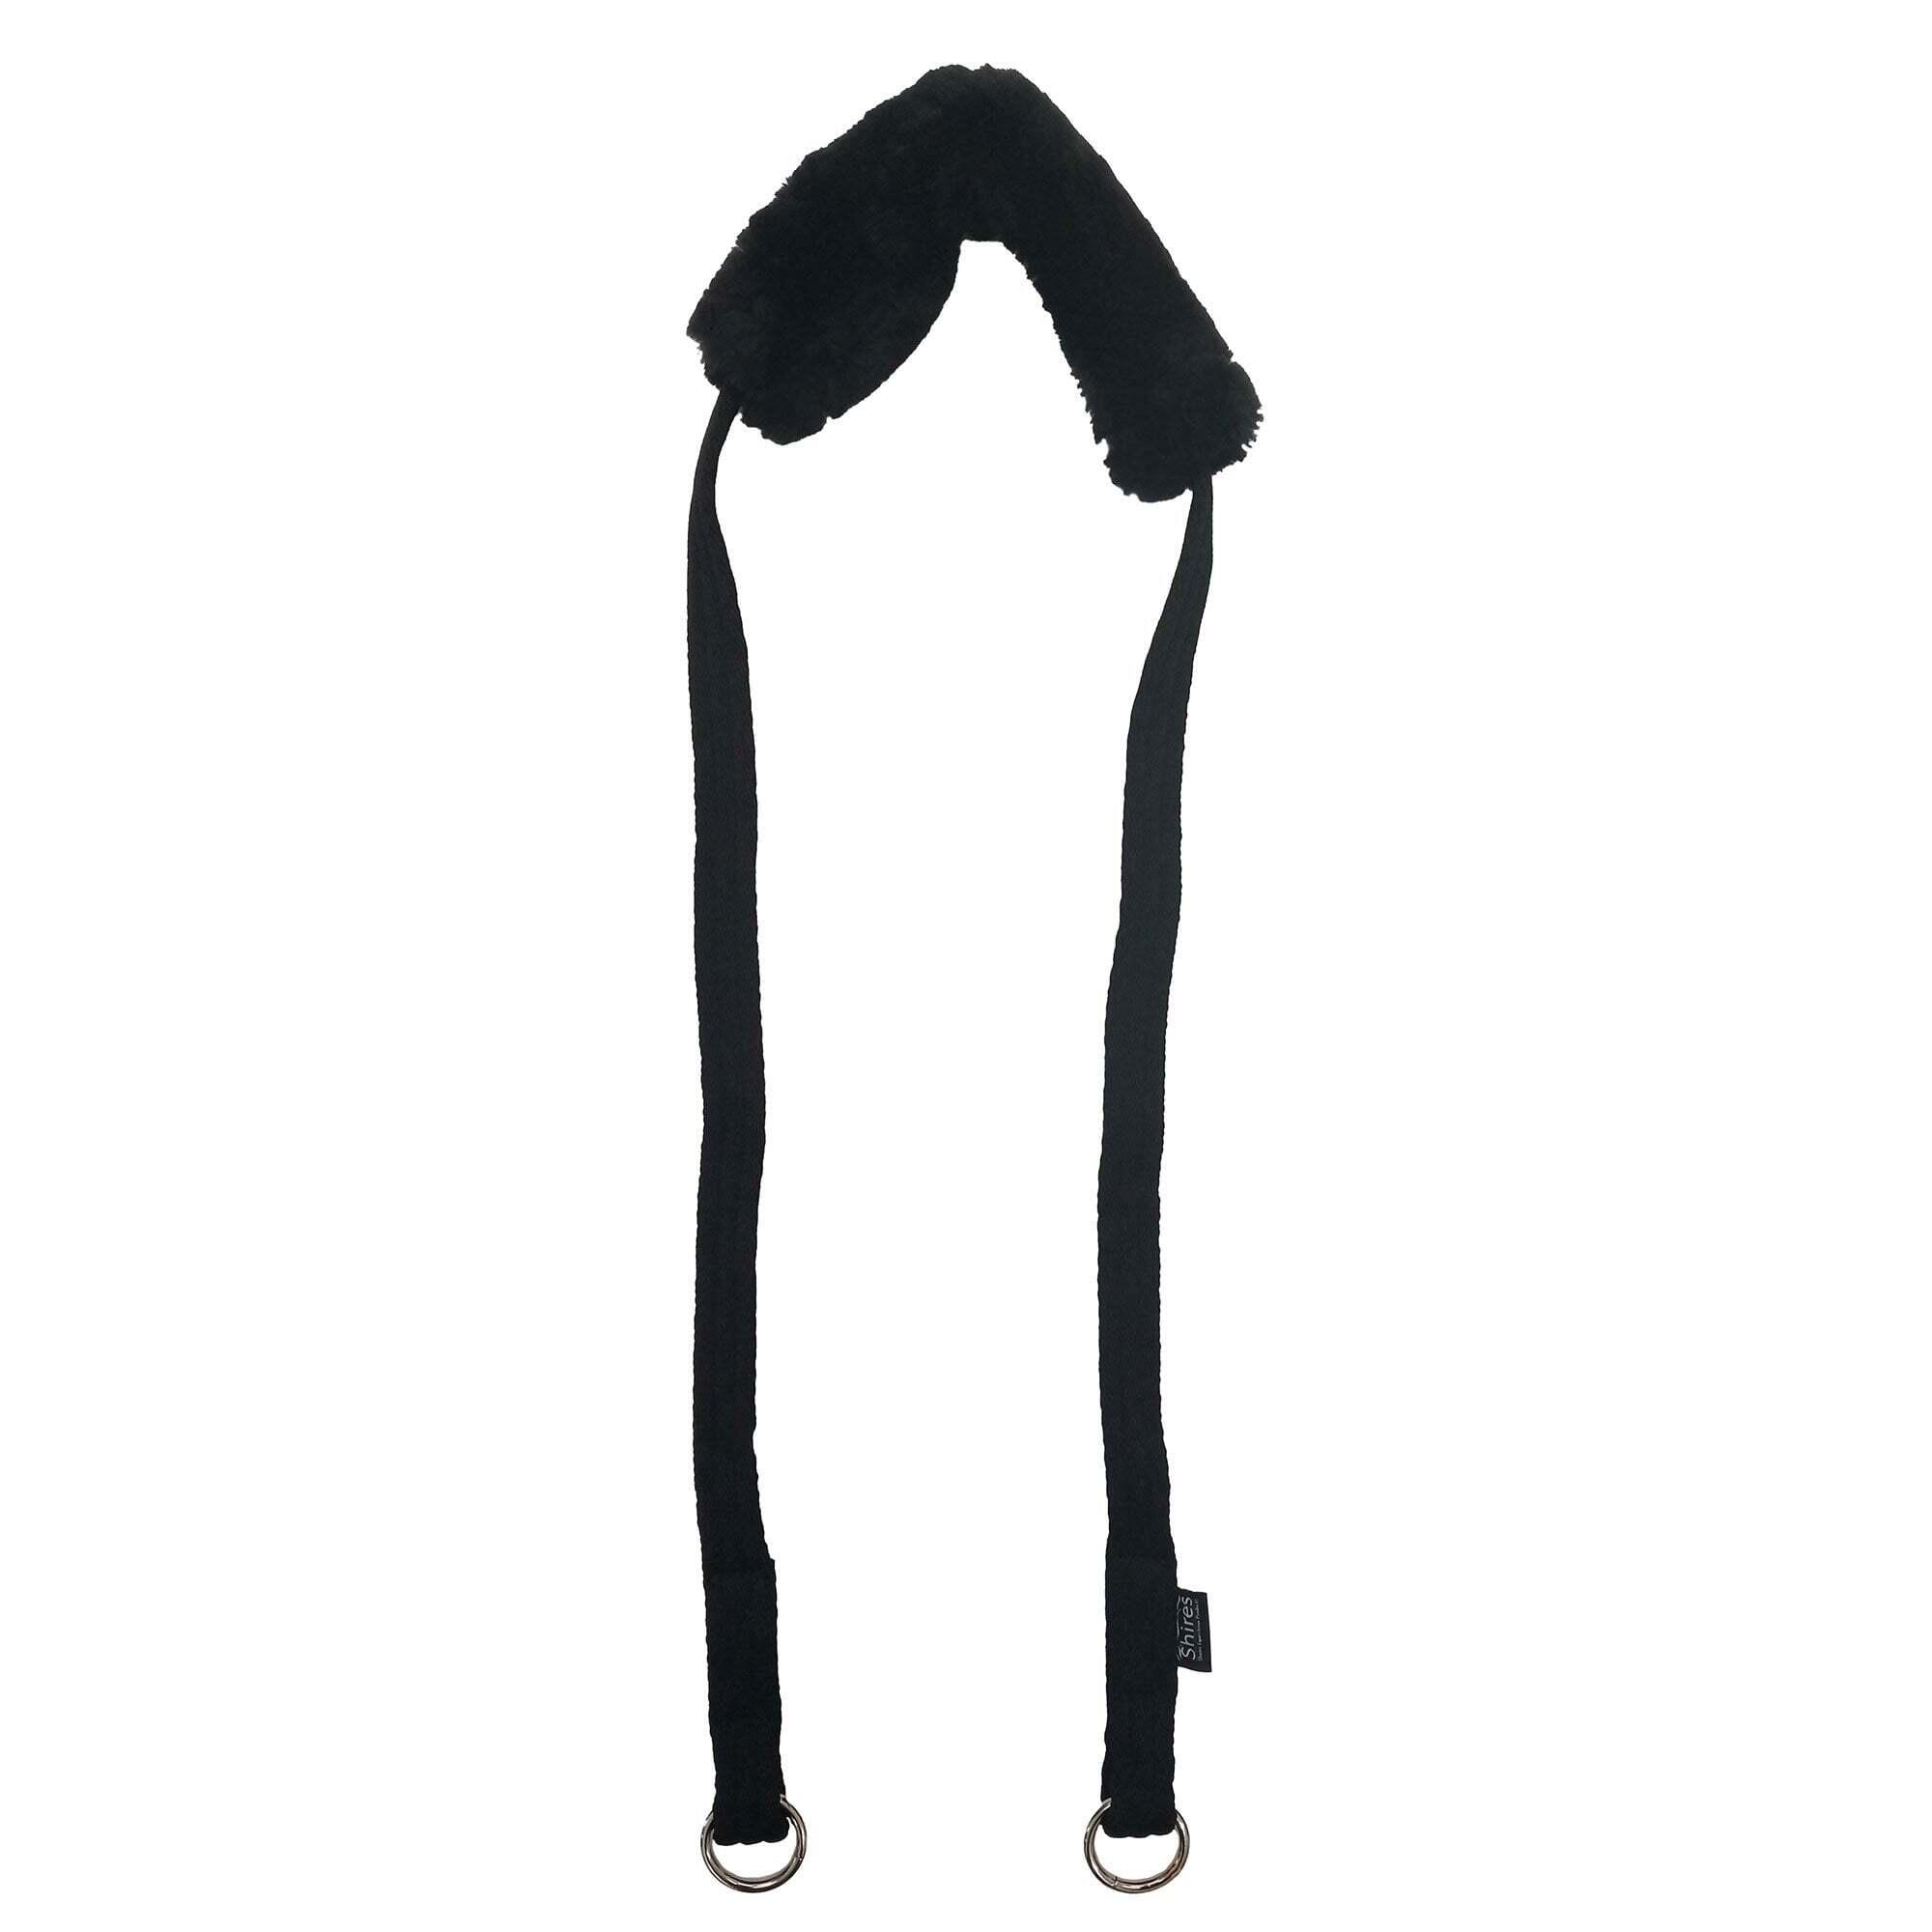 SHIRES Leather Horse Lunging Adapter (Black)